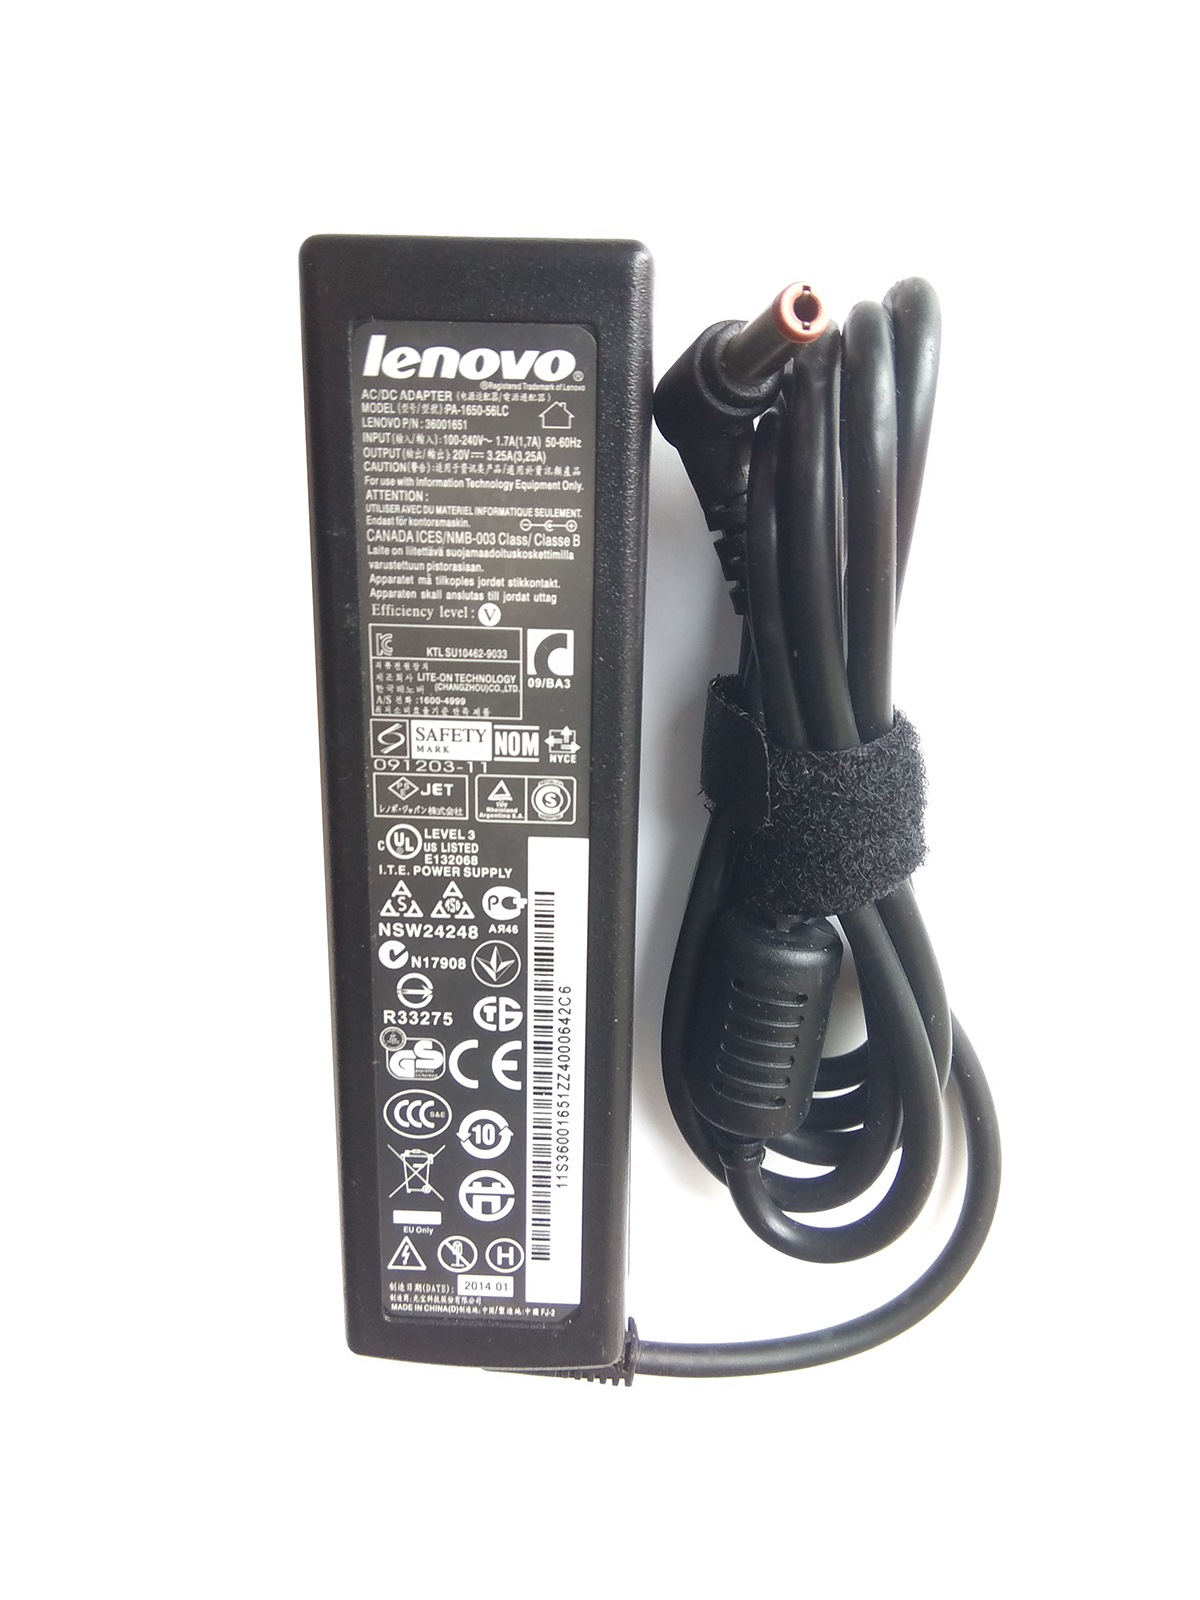 20V 3.25A 65W Lenovo AC Adapter Replace Liteon 0335A2065 Power Supply - $35.99